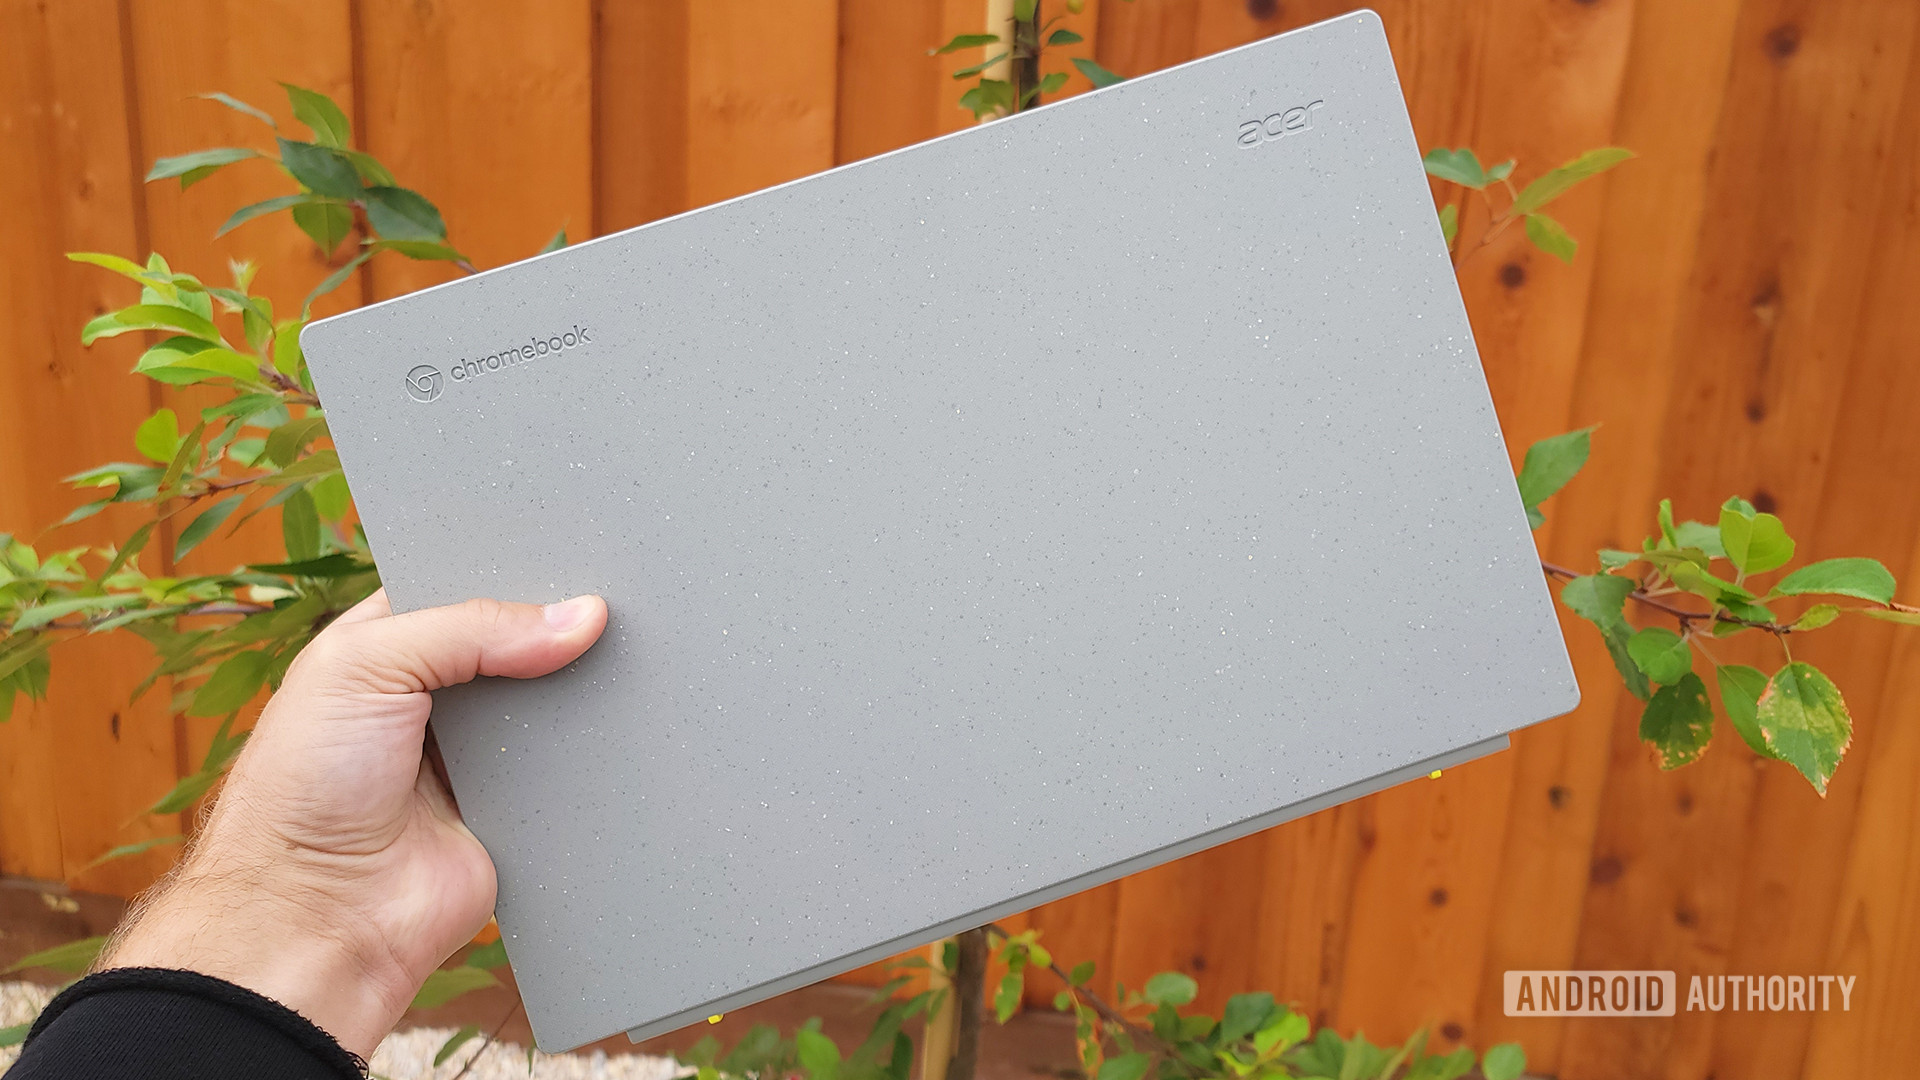 Check out this cool rugged Chromebook prototype made of recycled materials